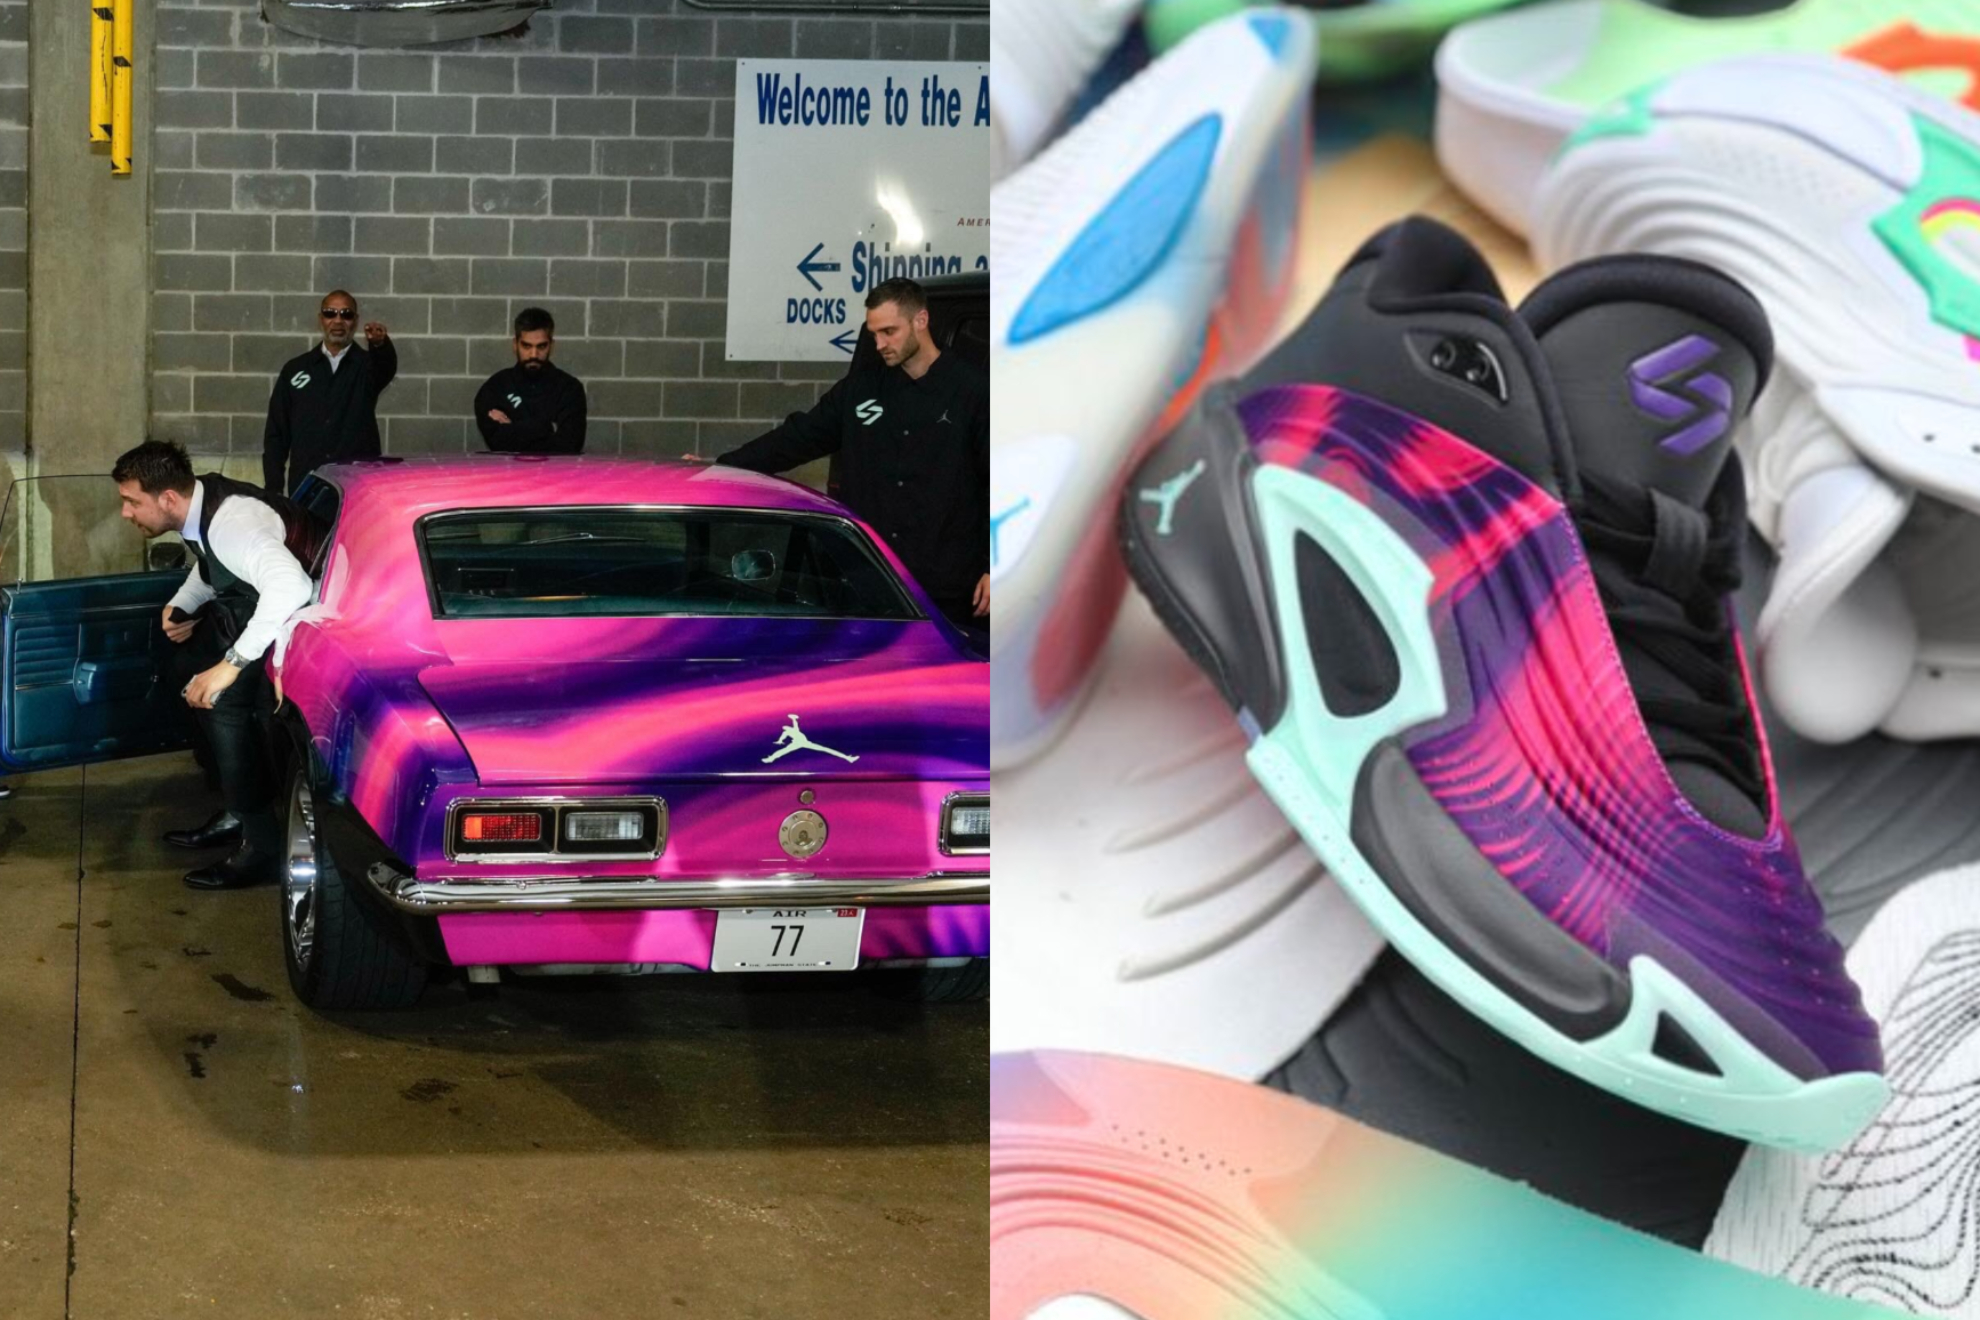 Doncic unveils new trainers, and Jordan gives him matching customized car